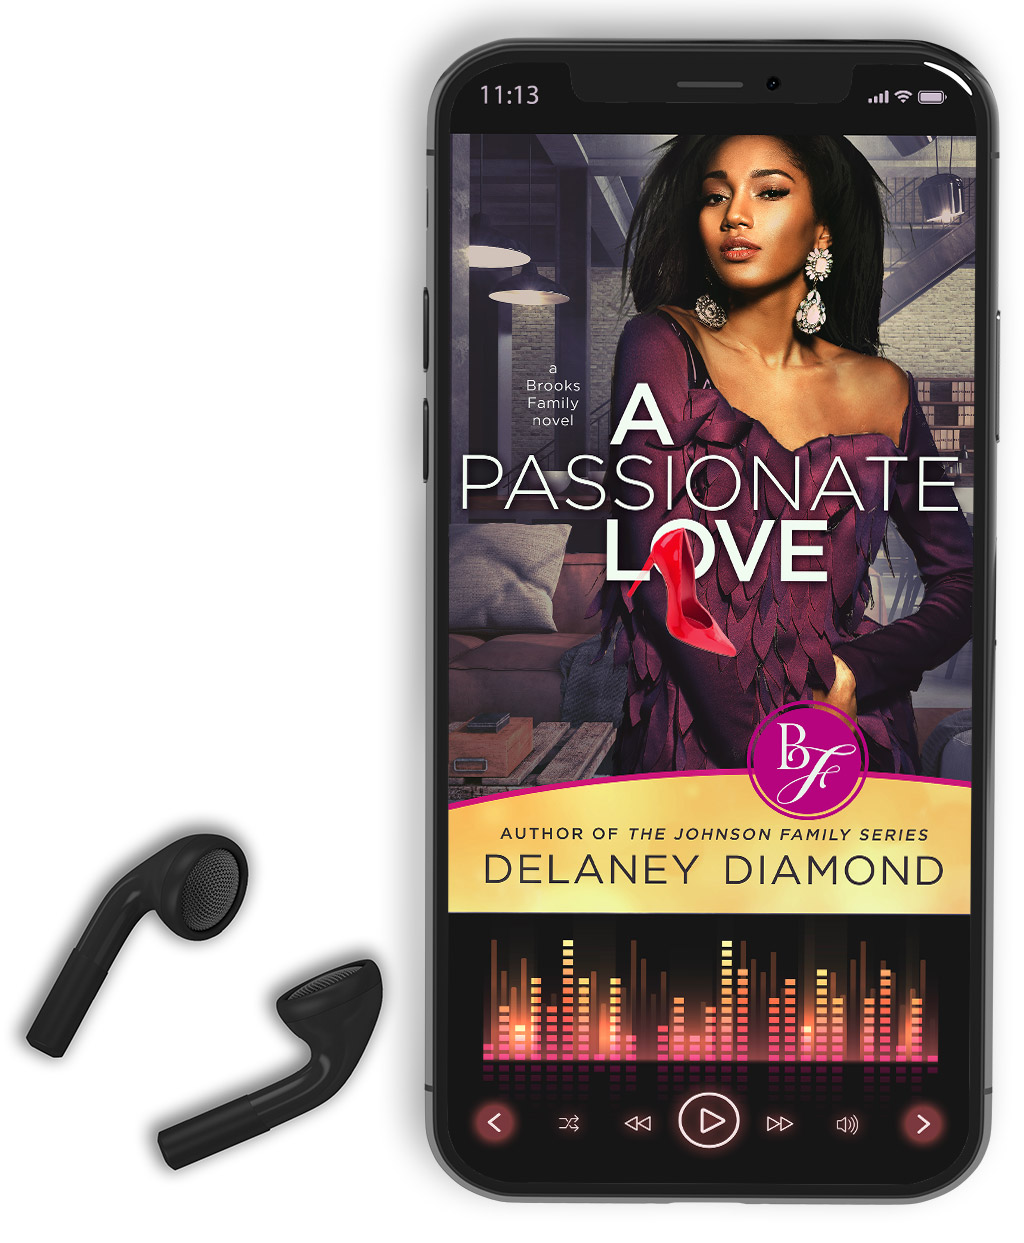 A Passionate Love - Brooks family series #1 - Audiobook by Delaney Diamond